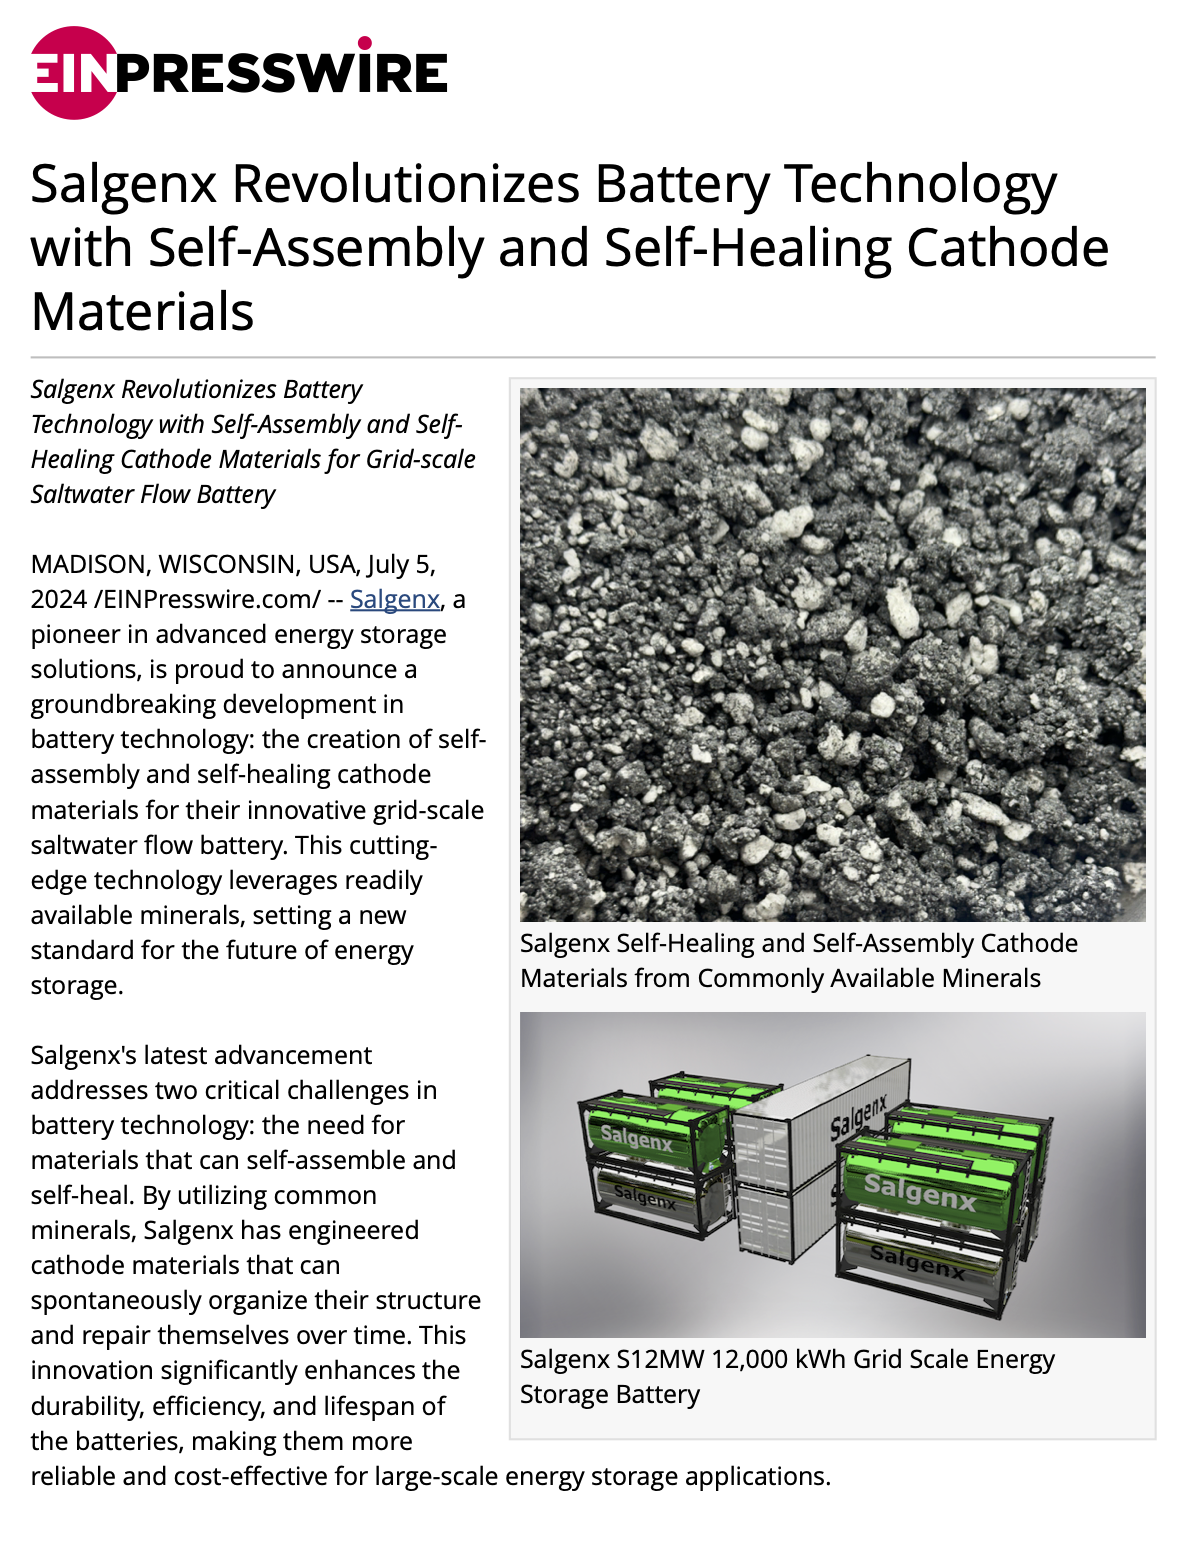 Salgenx Revolutionizes Battery Technology with Self-Assembly and Self-Healing Cathode Materials